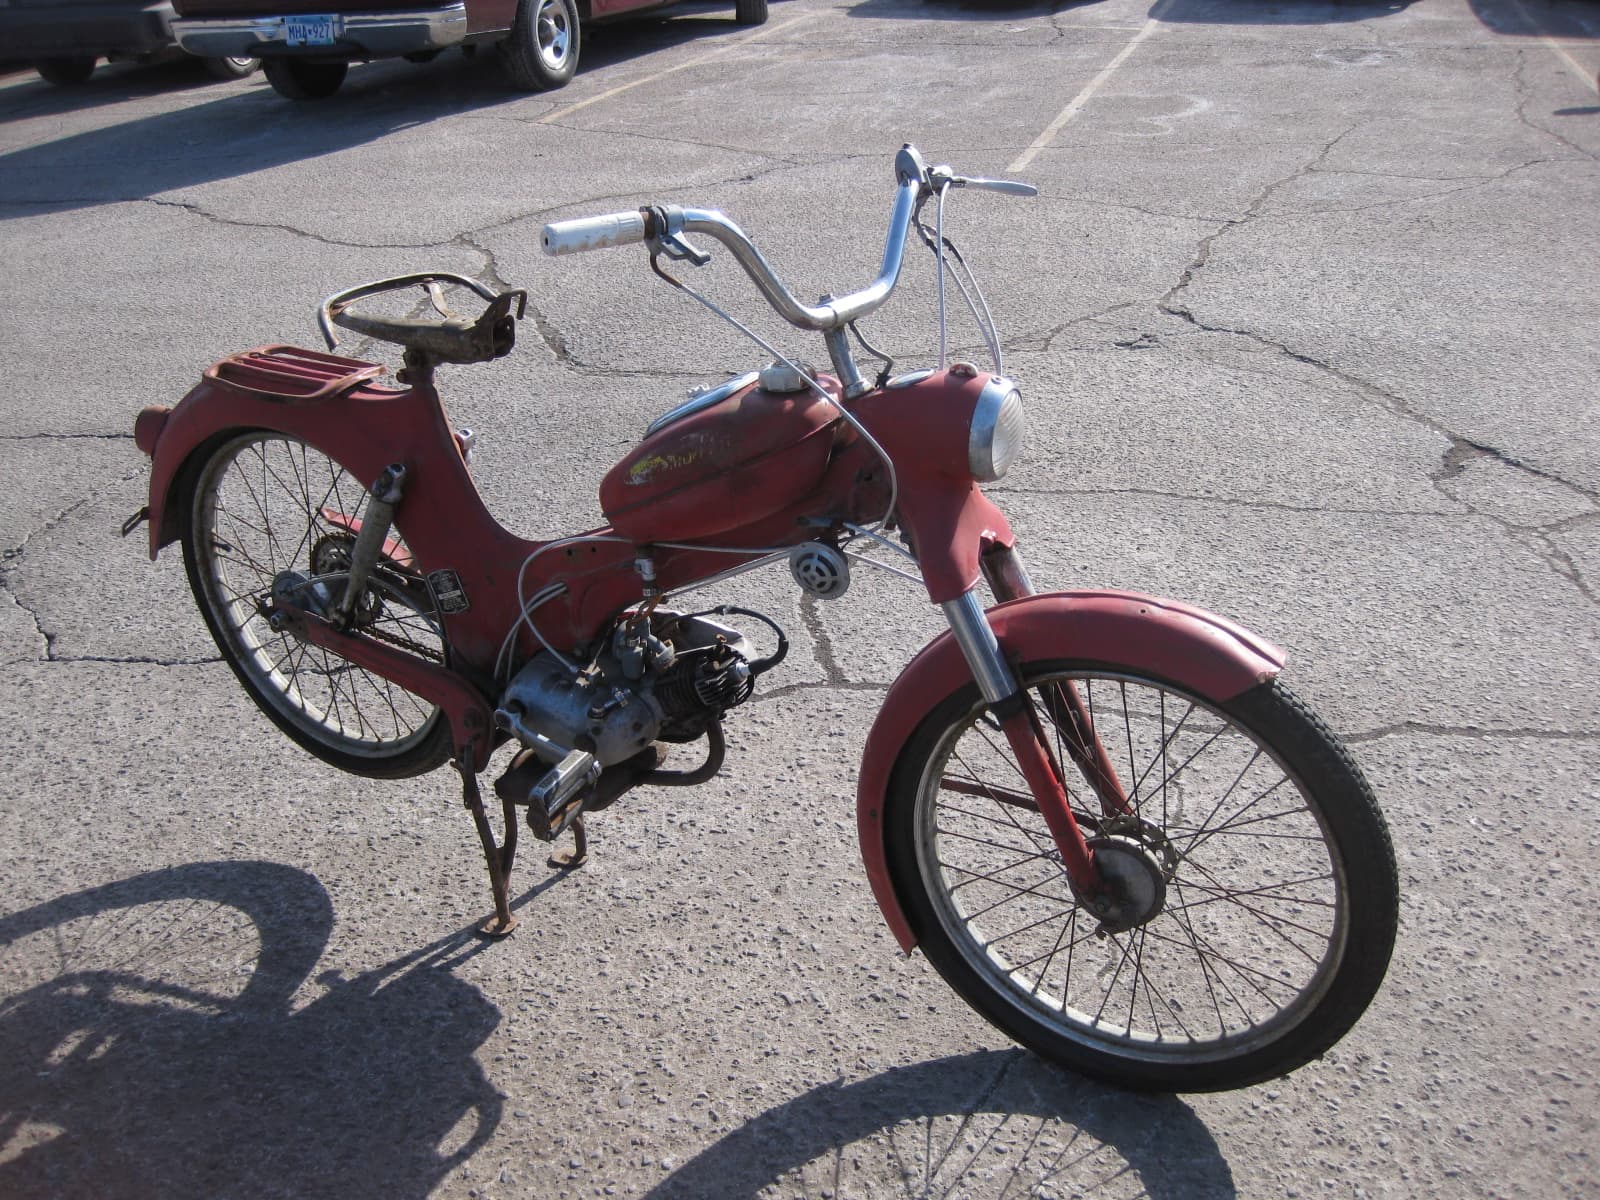 810.94000 Allstate Mo-Ped Puch